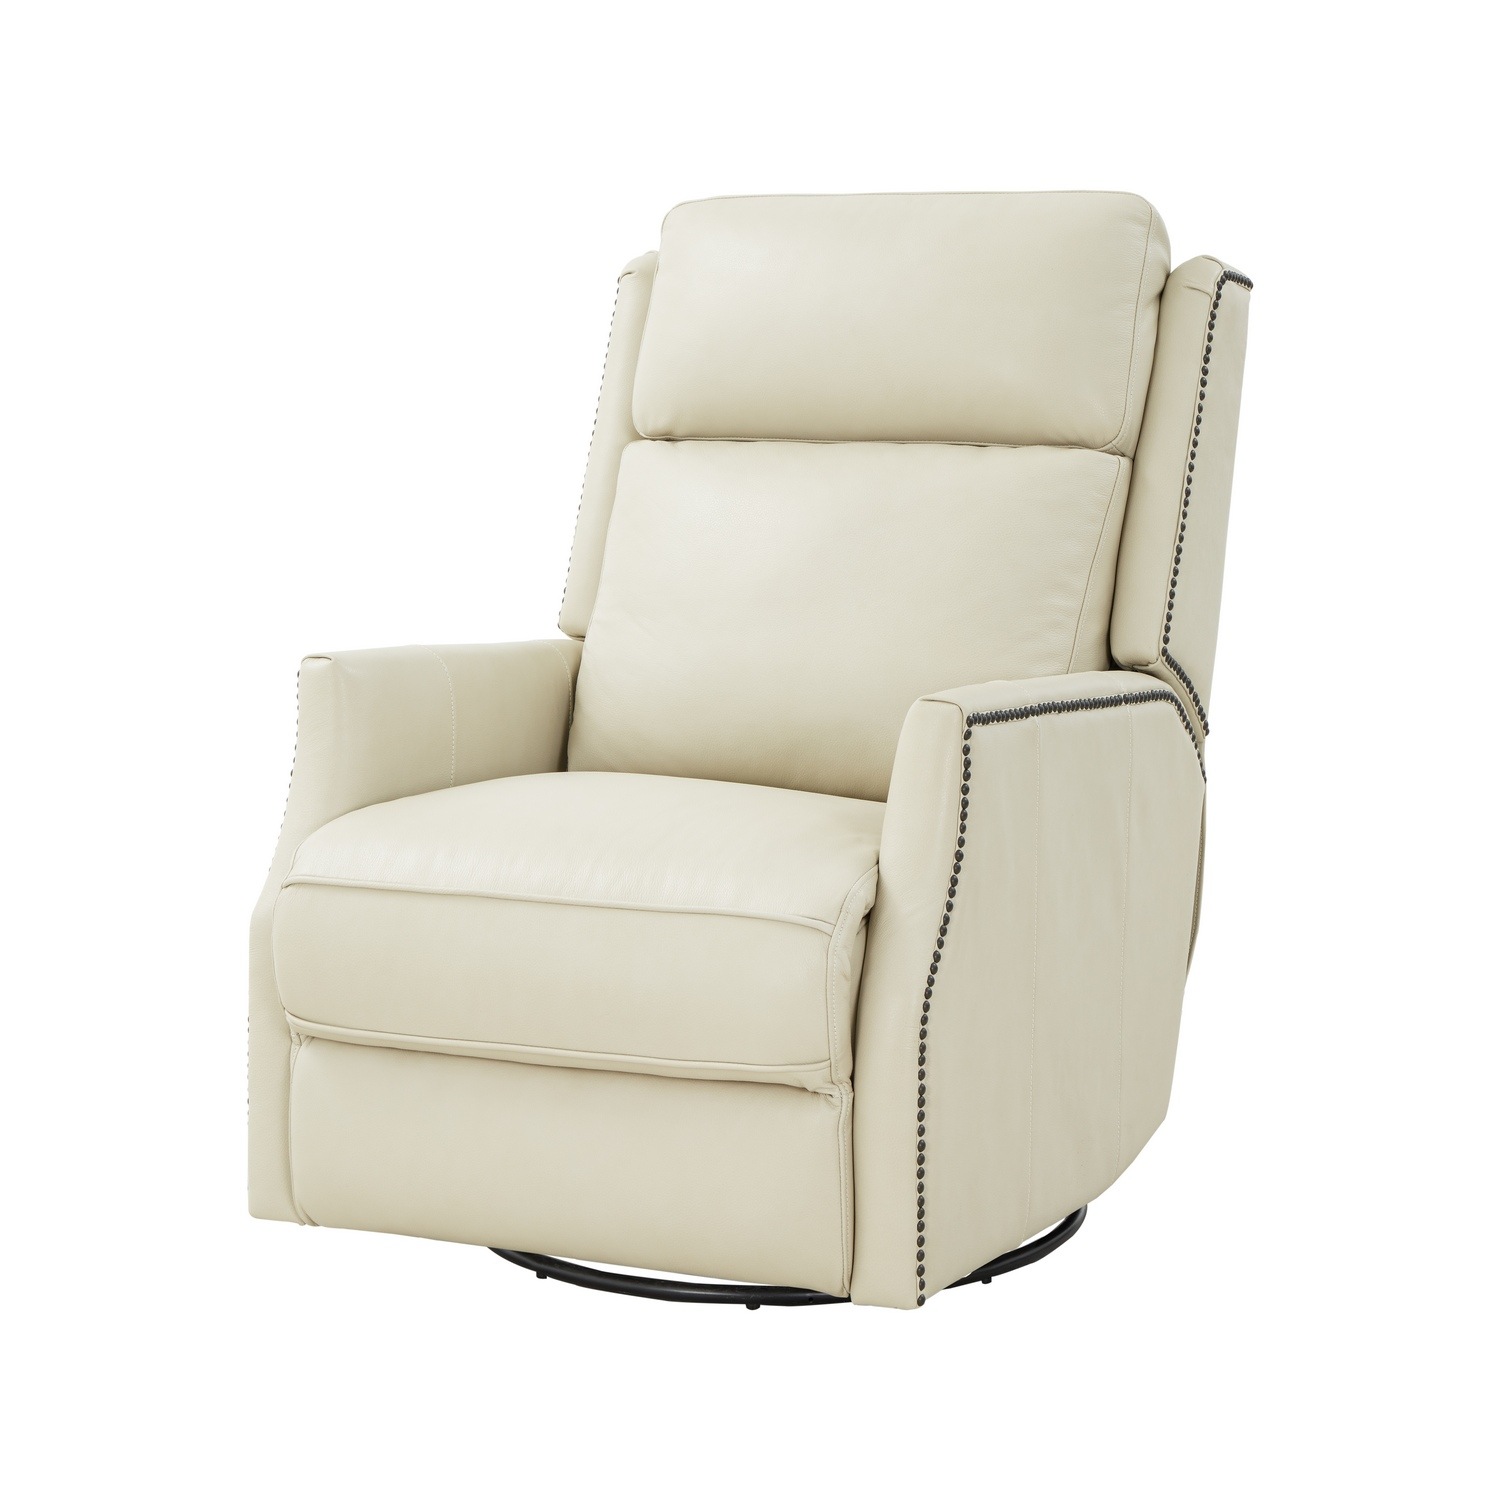 Barcalounger Cavill Swivel Glider Recliner Chair with Power Recline and Power Head Rest - Barone Parchment/All Leather